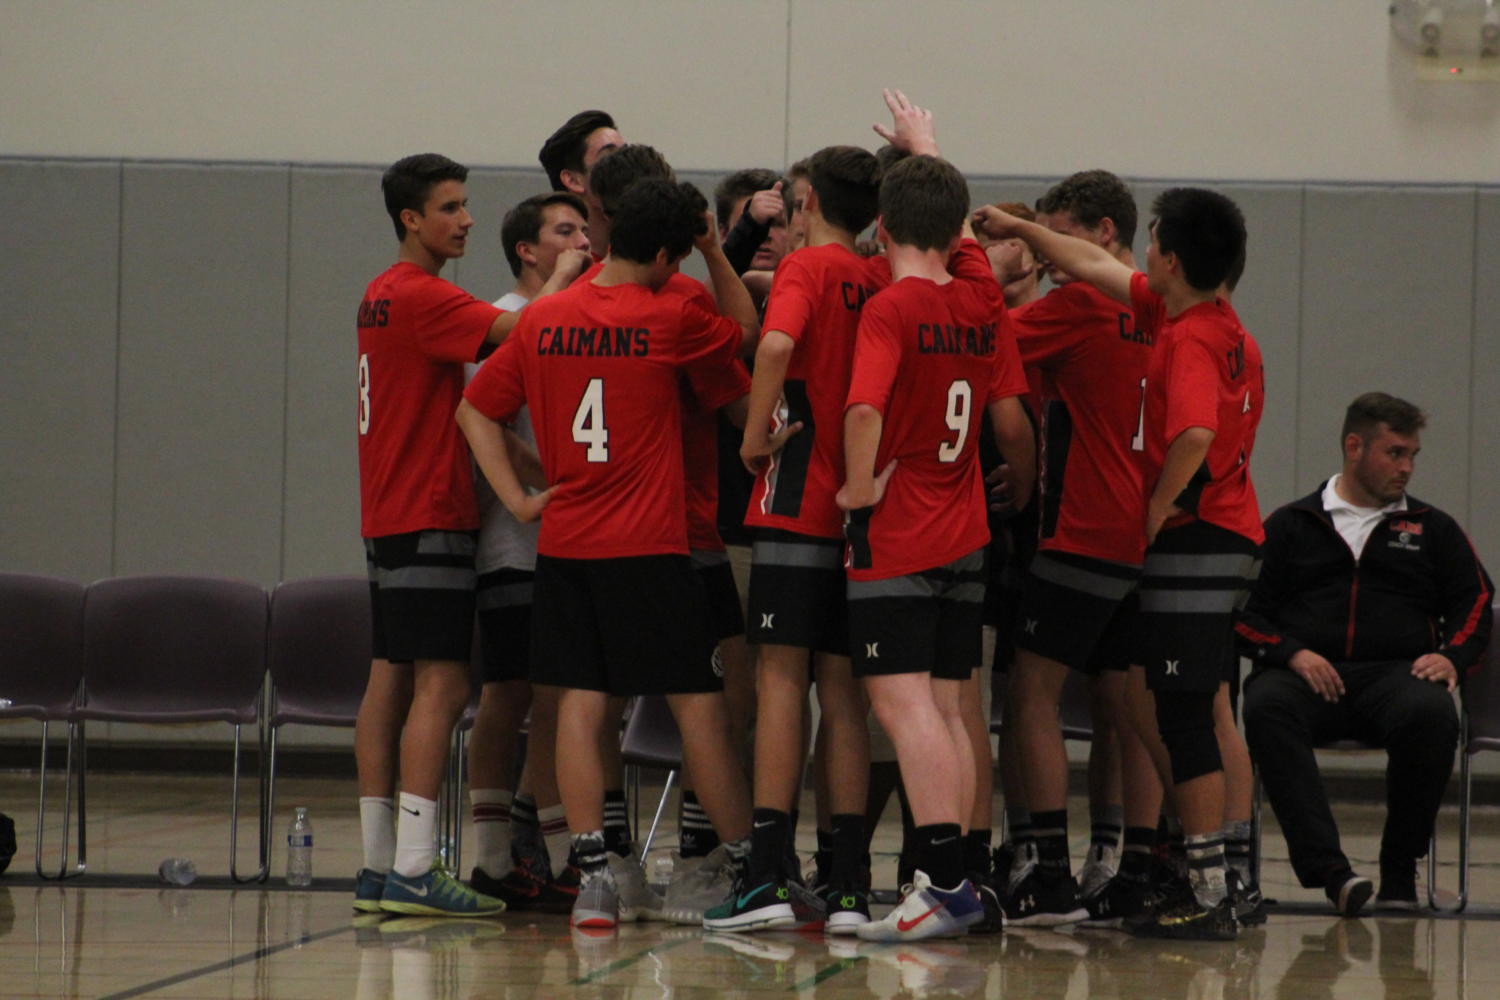 The team huddles up before heading out onto the court. Photo taken by Aubrey Gehman.